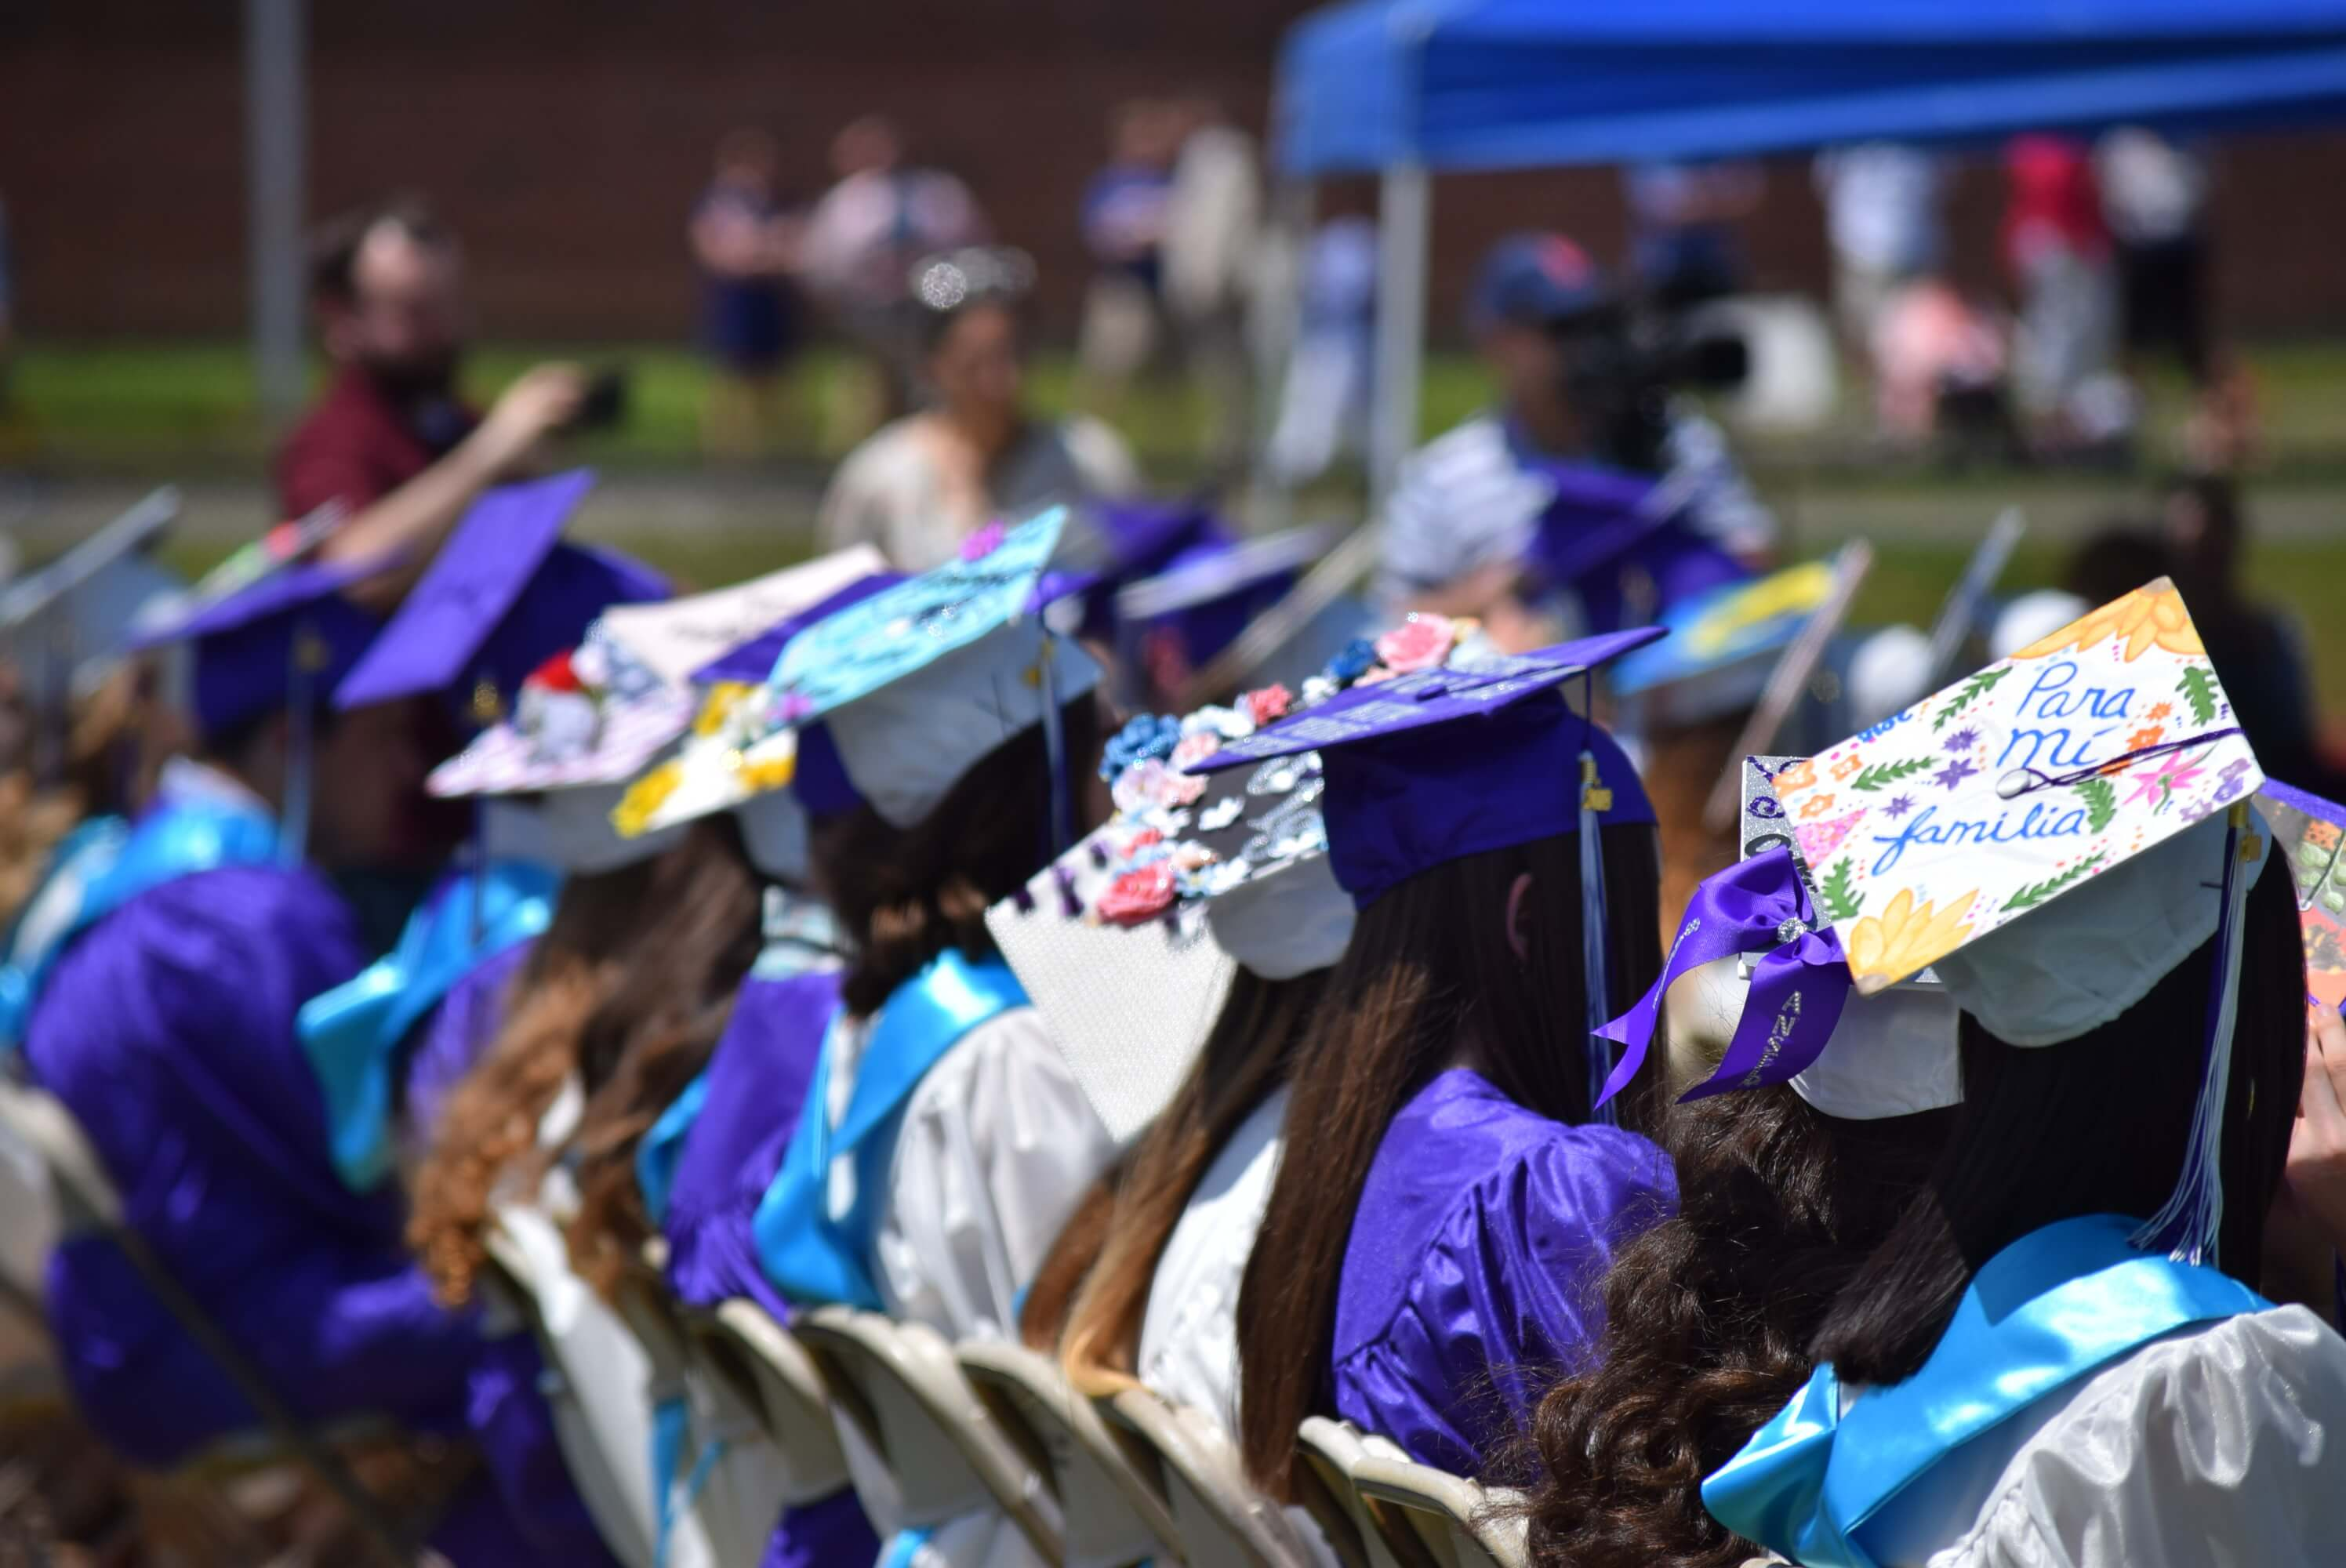 Students wearing decorated graduation caps.